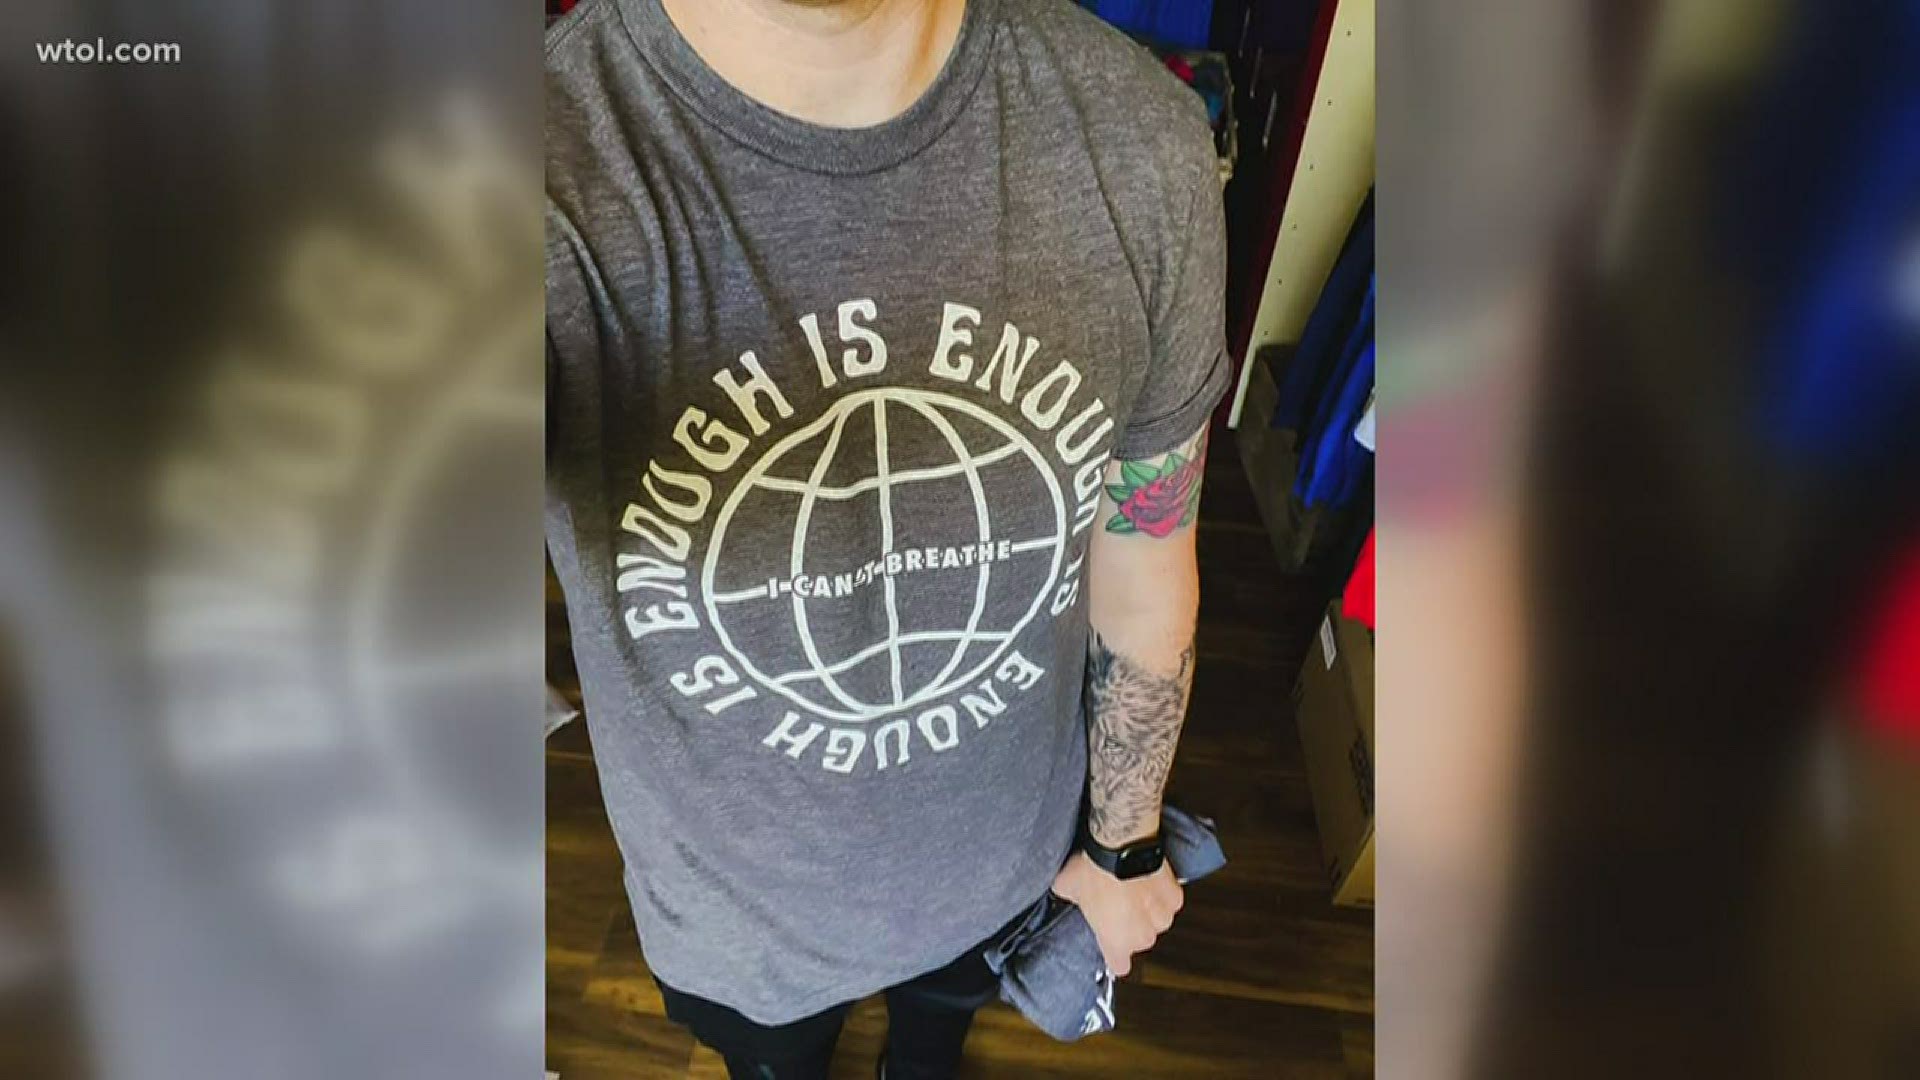 The 'Enough is Enough' shirts were also handed out for free to downtown Findlay protesters.